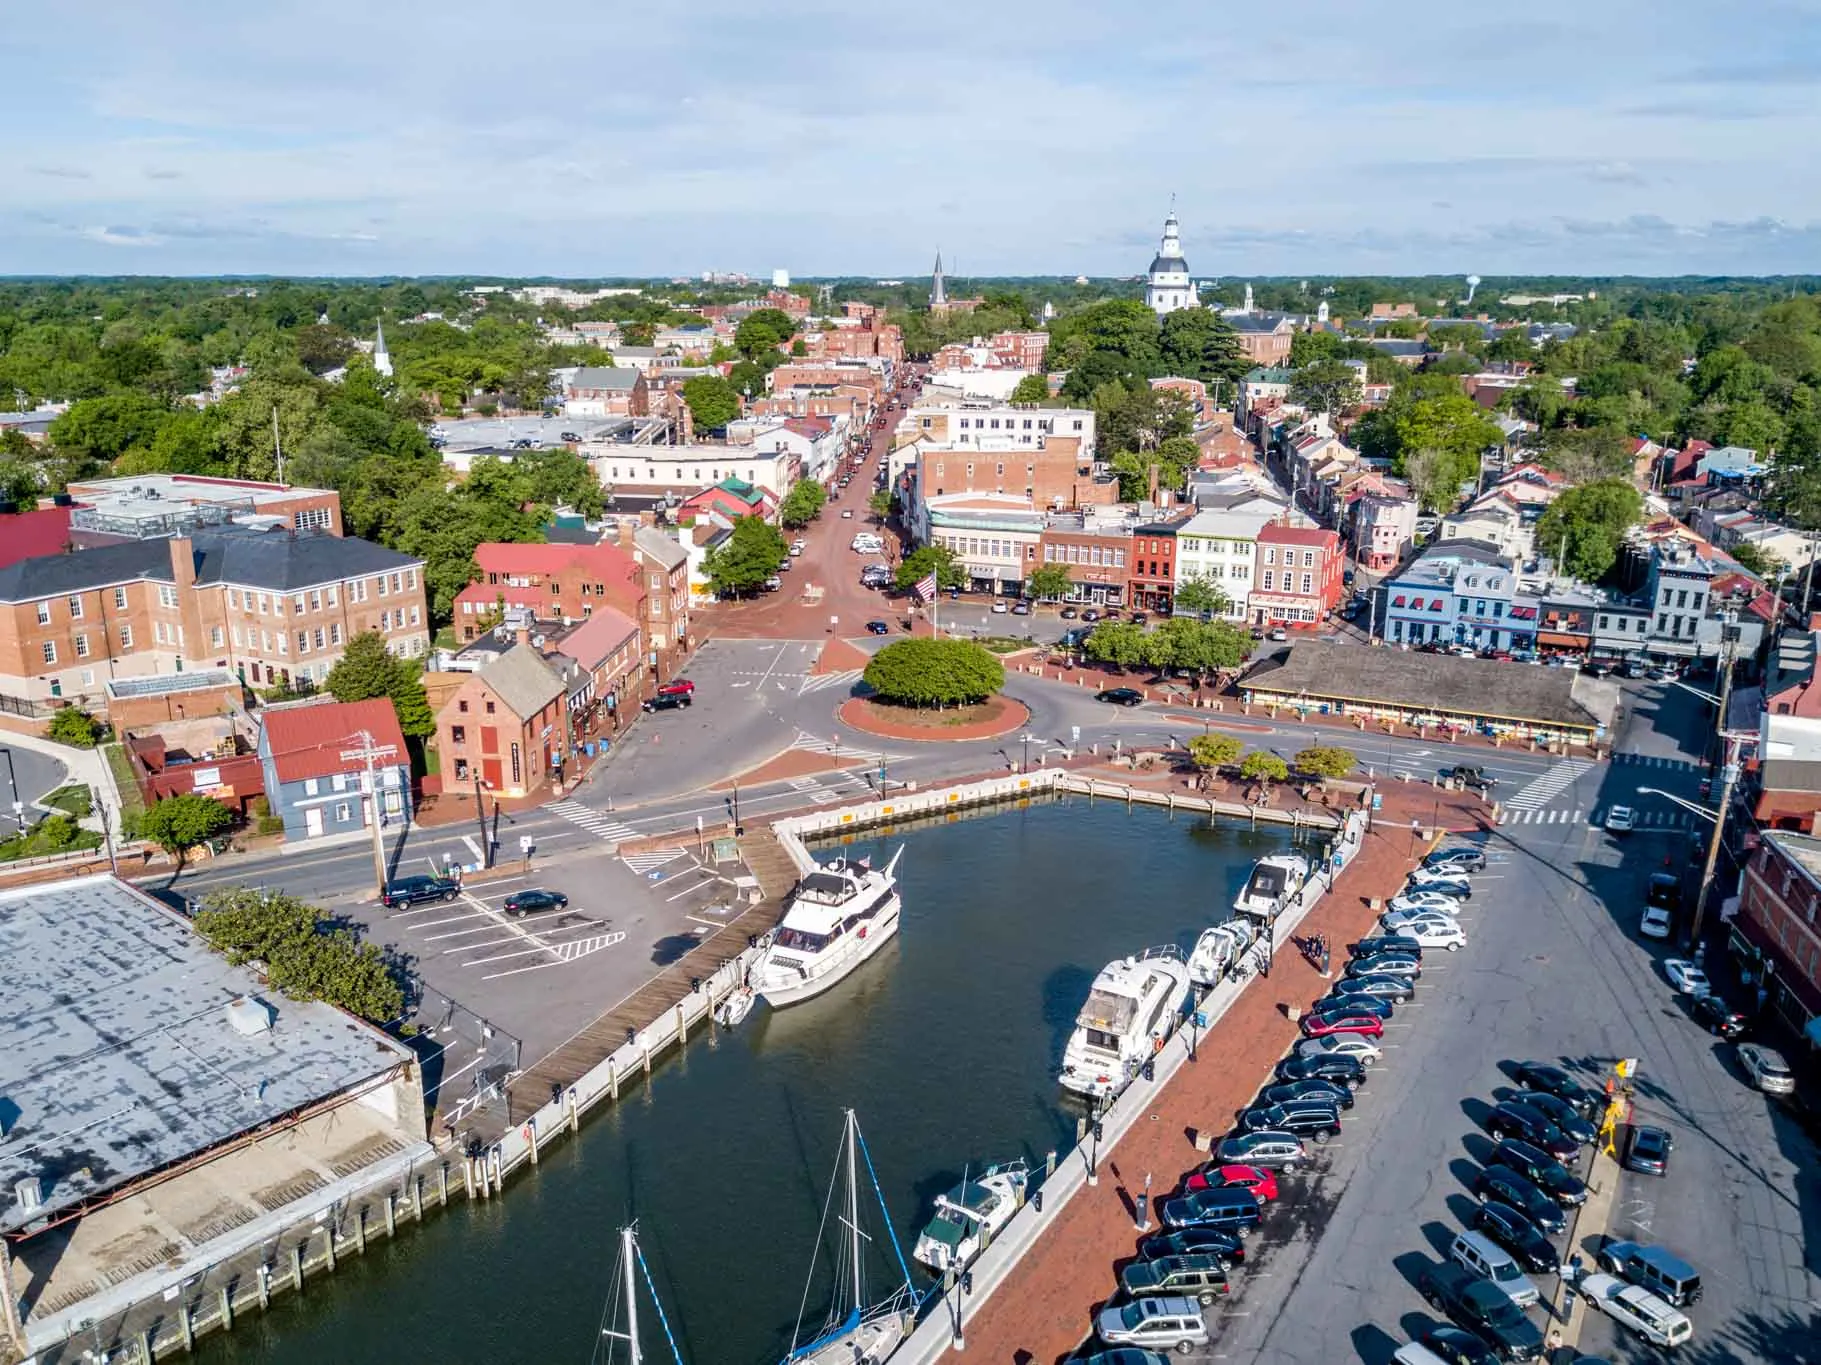 Downtown Annapolis, one of the best weekend getaways in the US